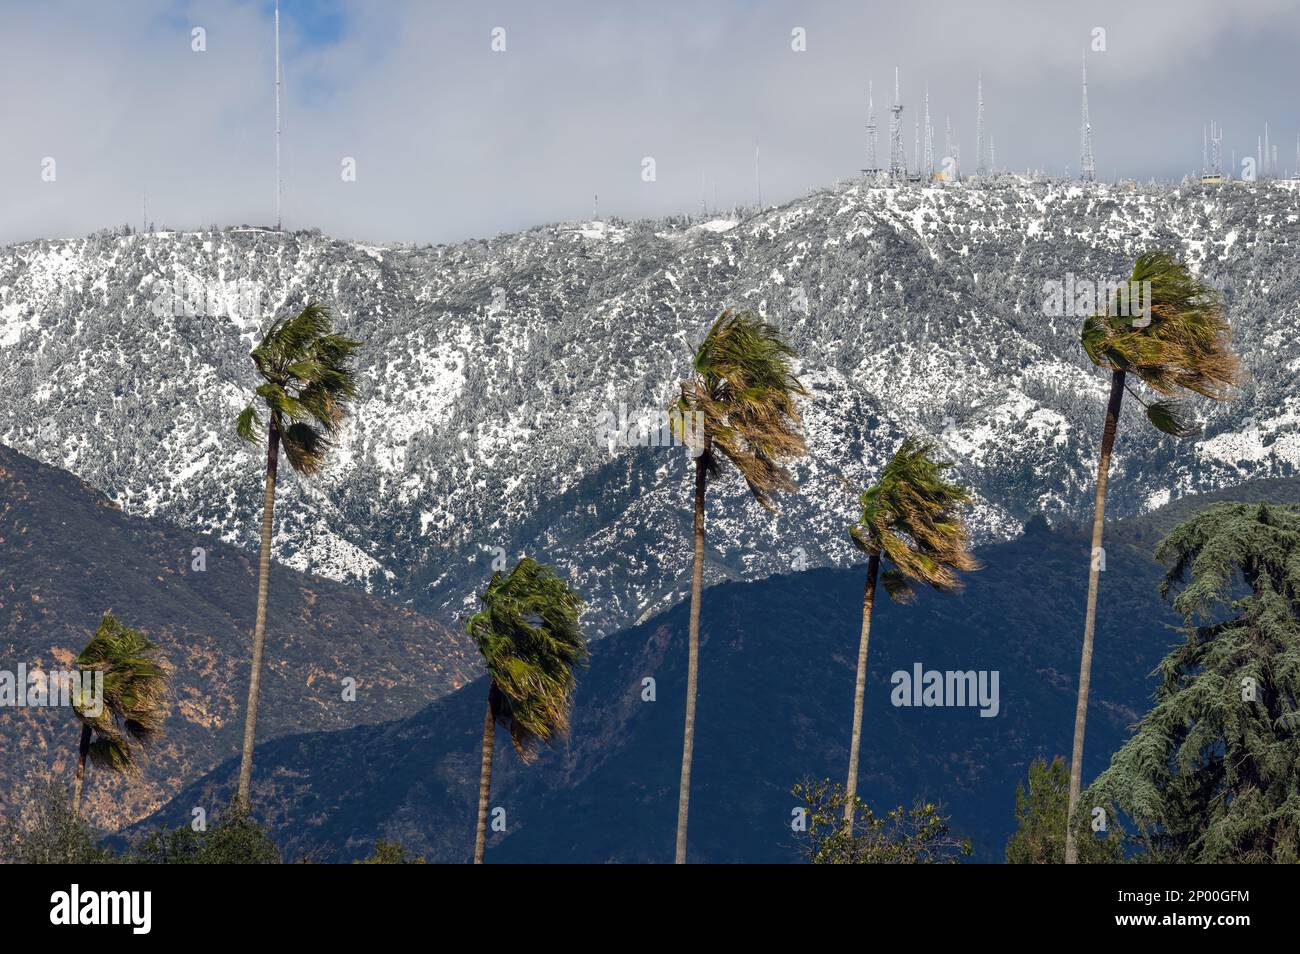 West, high wind shown in Pasadena, California. Palm trees and the San Gabriel Mountains in the background, looking north. Stock Photo